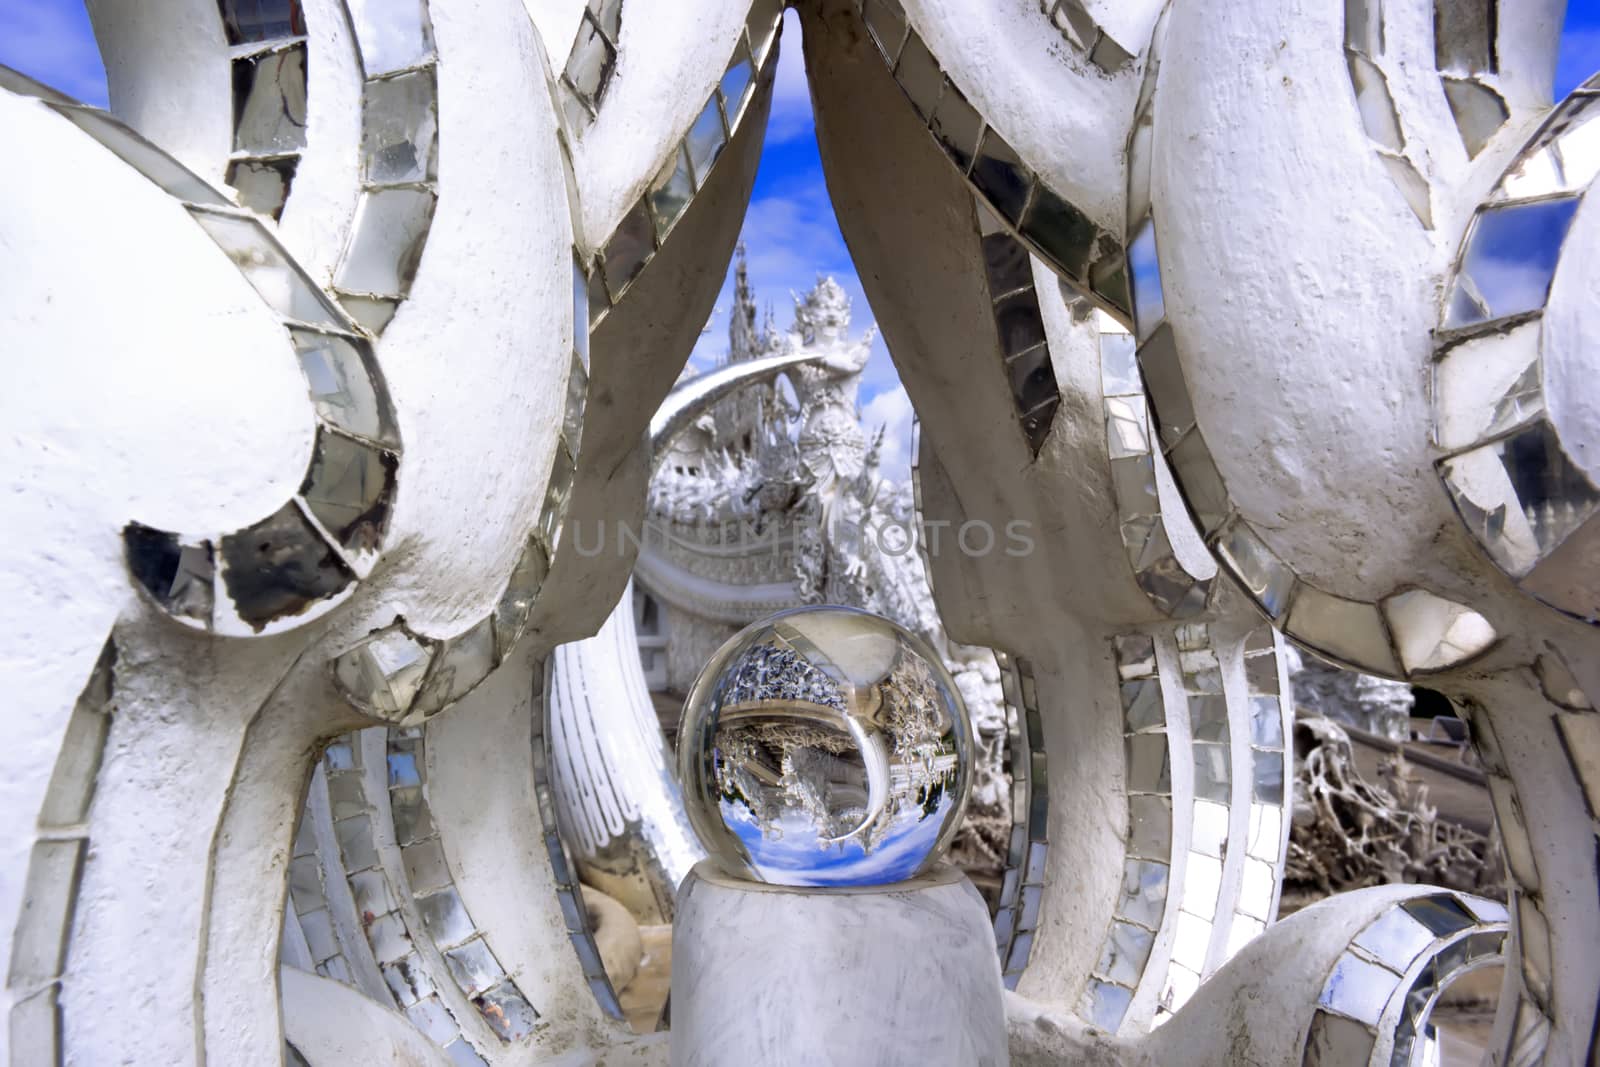 Ball of Wat Rong Khun. Contemporary unconventional Buddhist temple in Chiang Rai, Thailand.